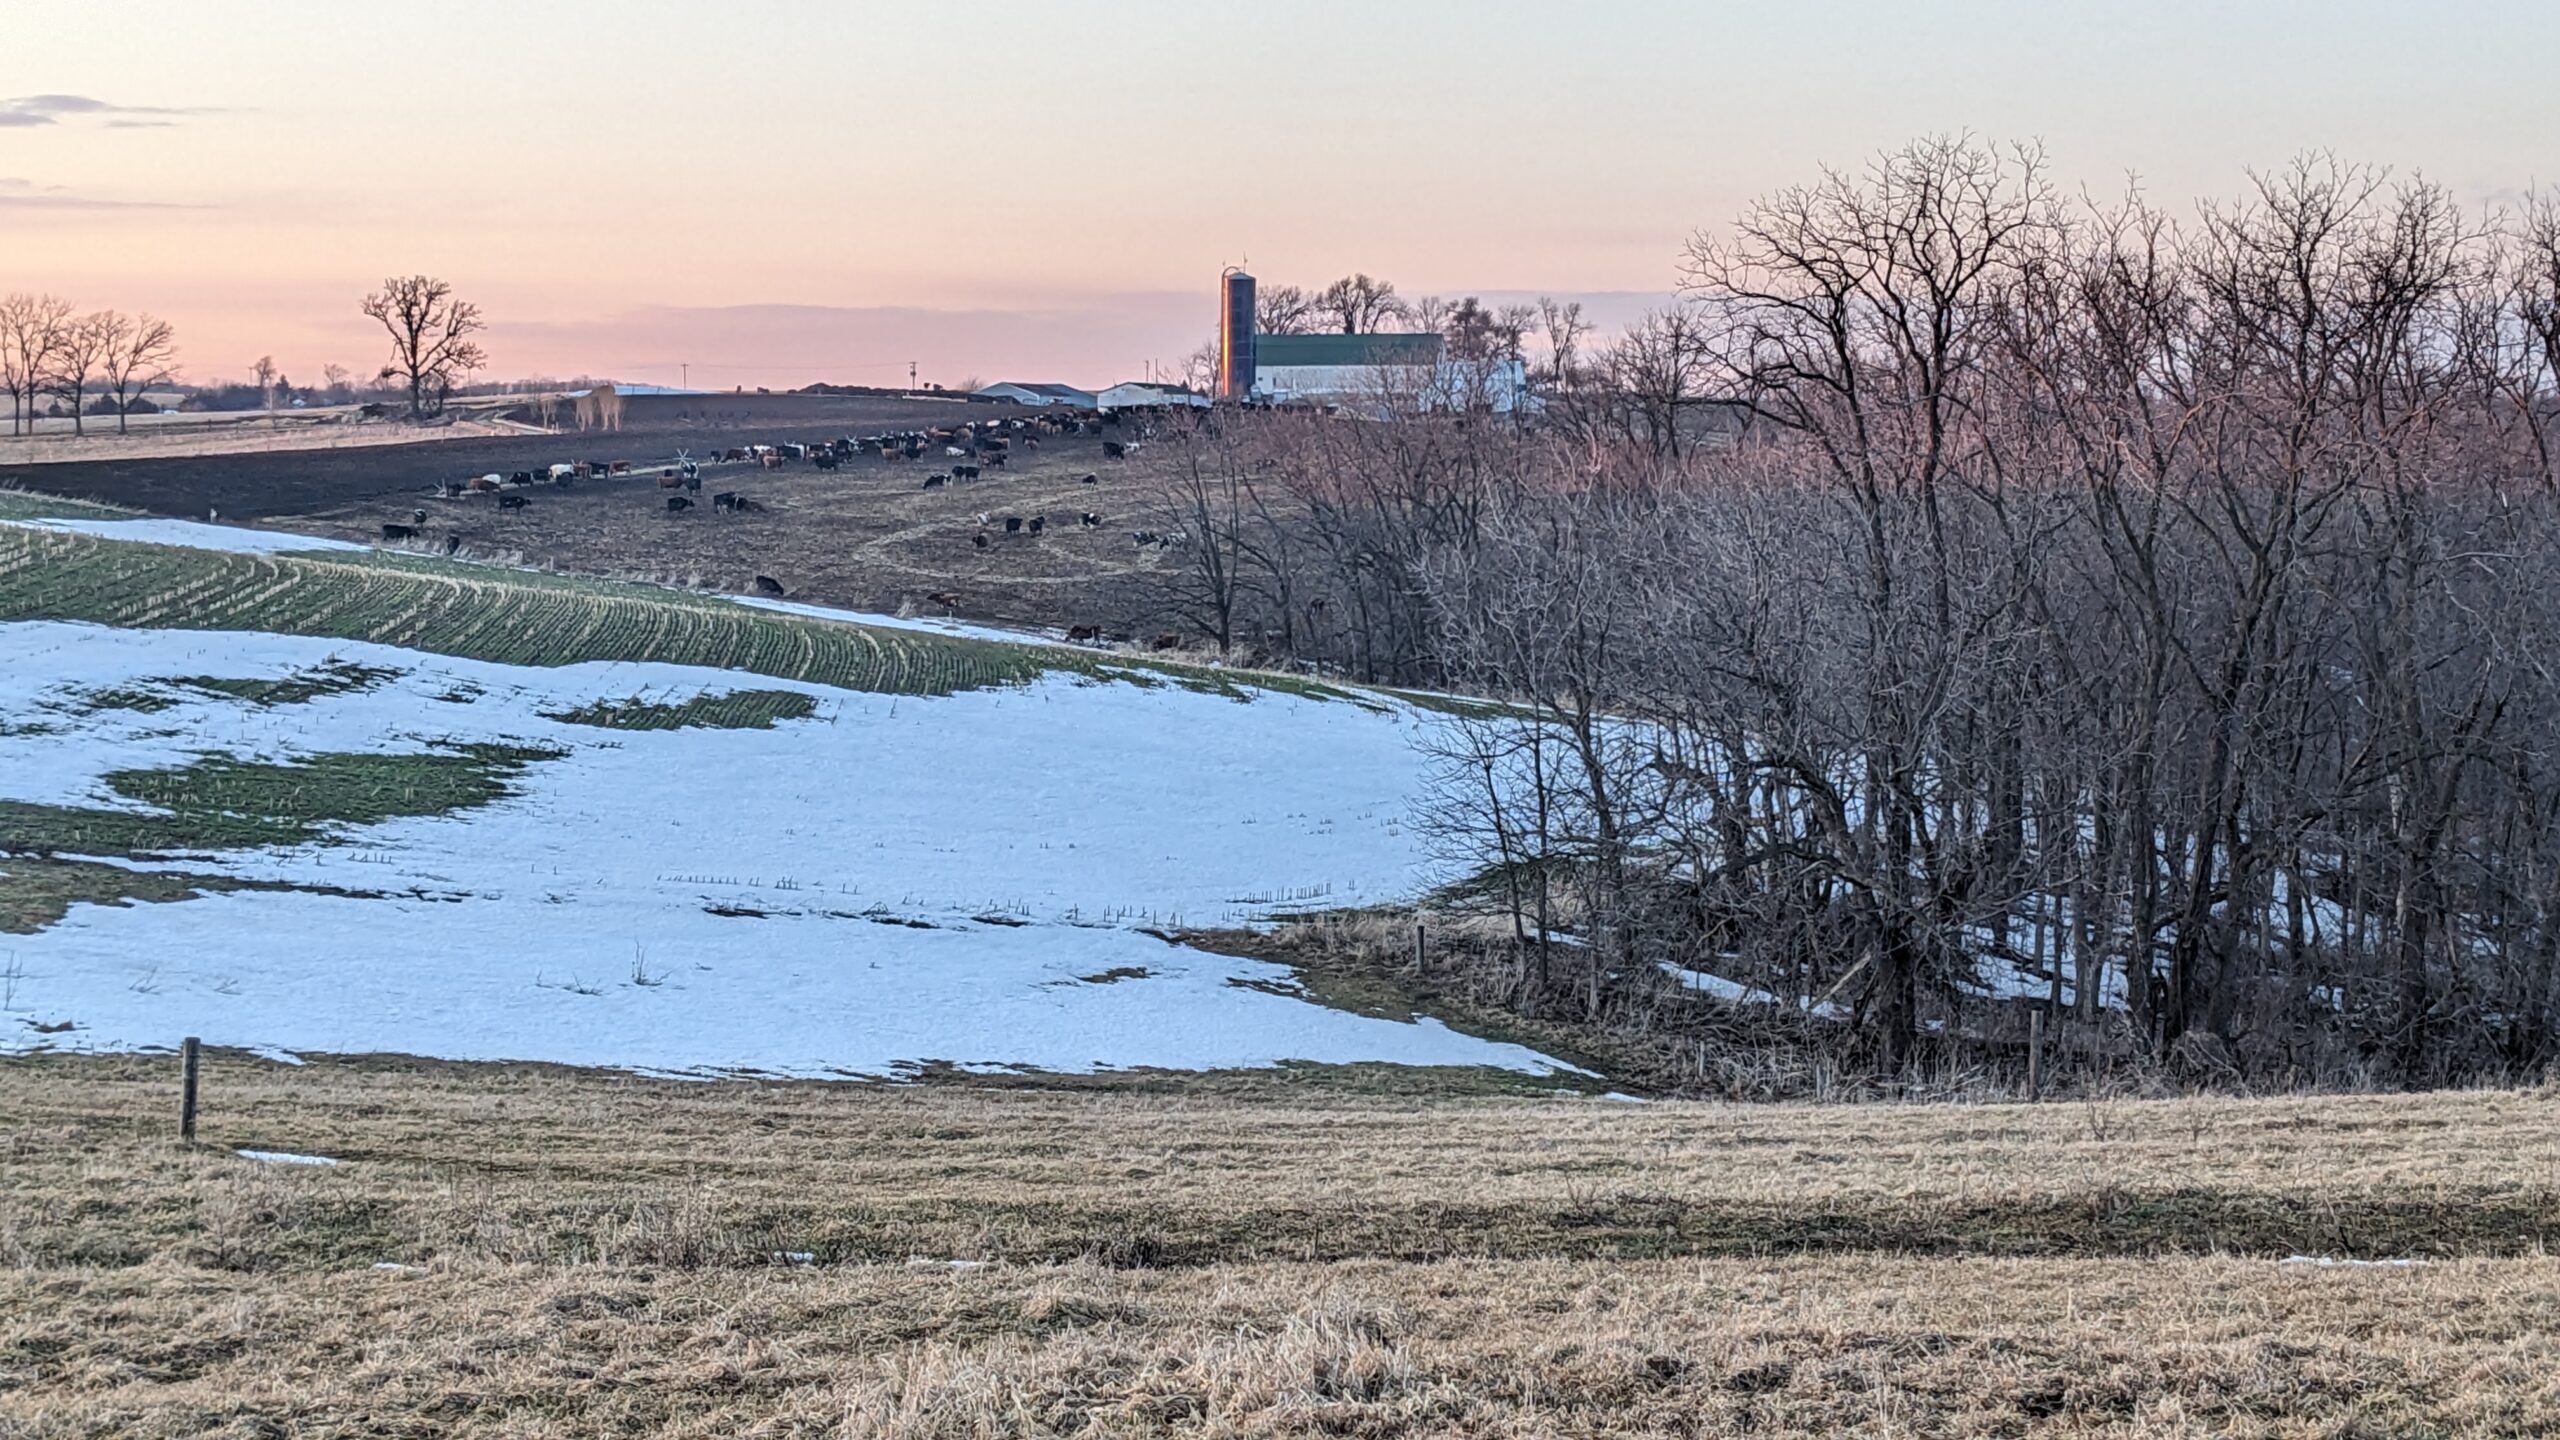 A wide view of a farm with a herd of cows in the distance and patches of snow on the ground.